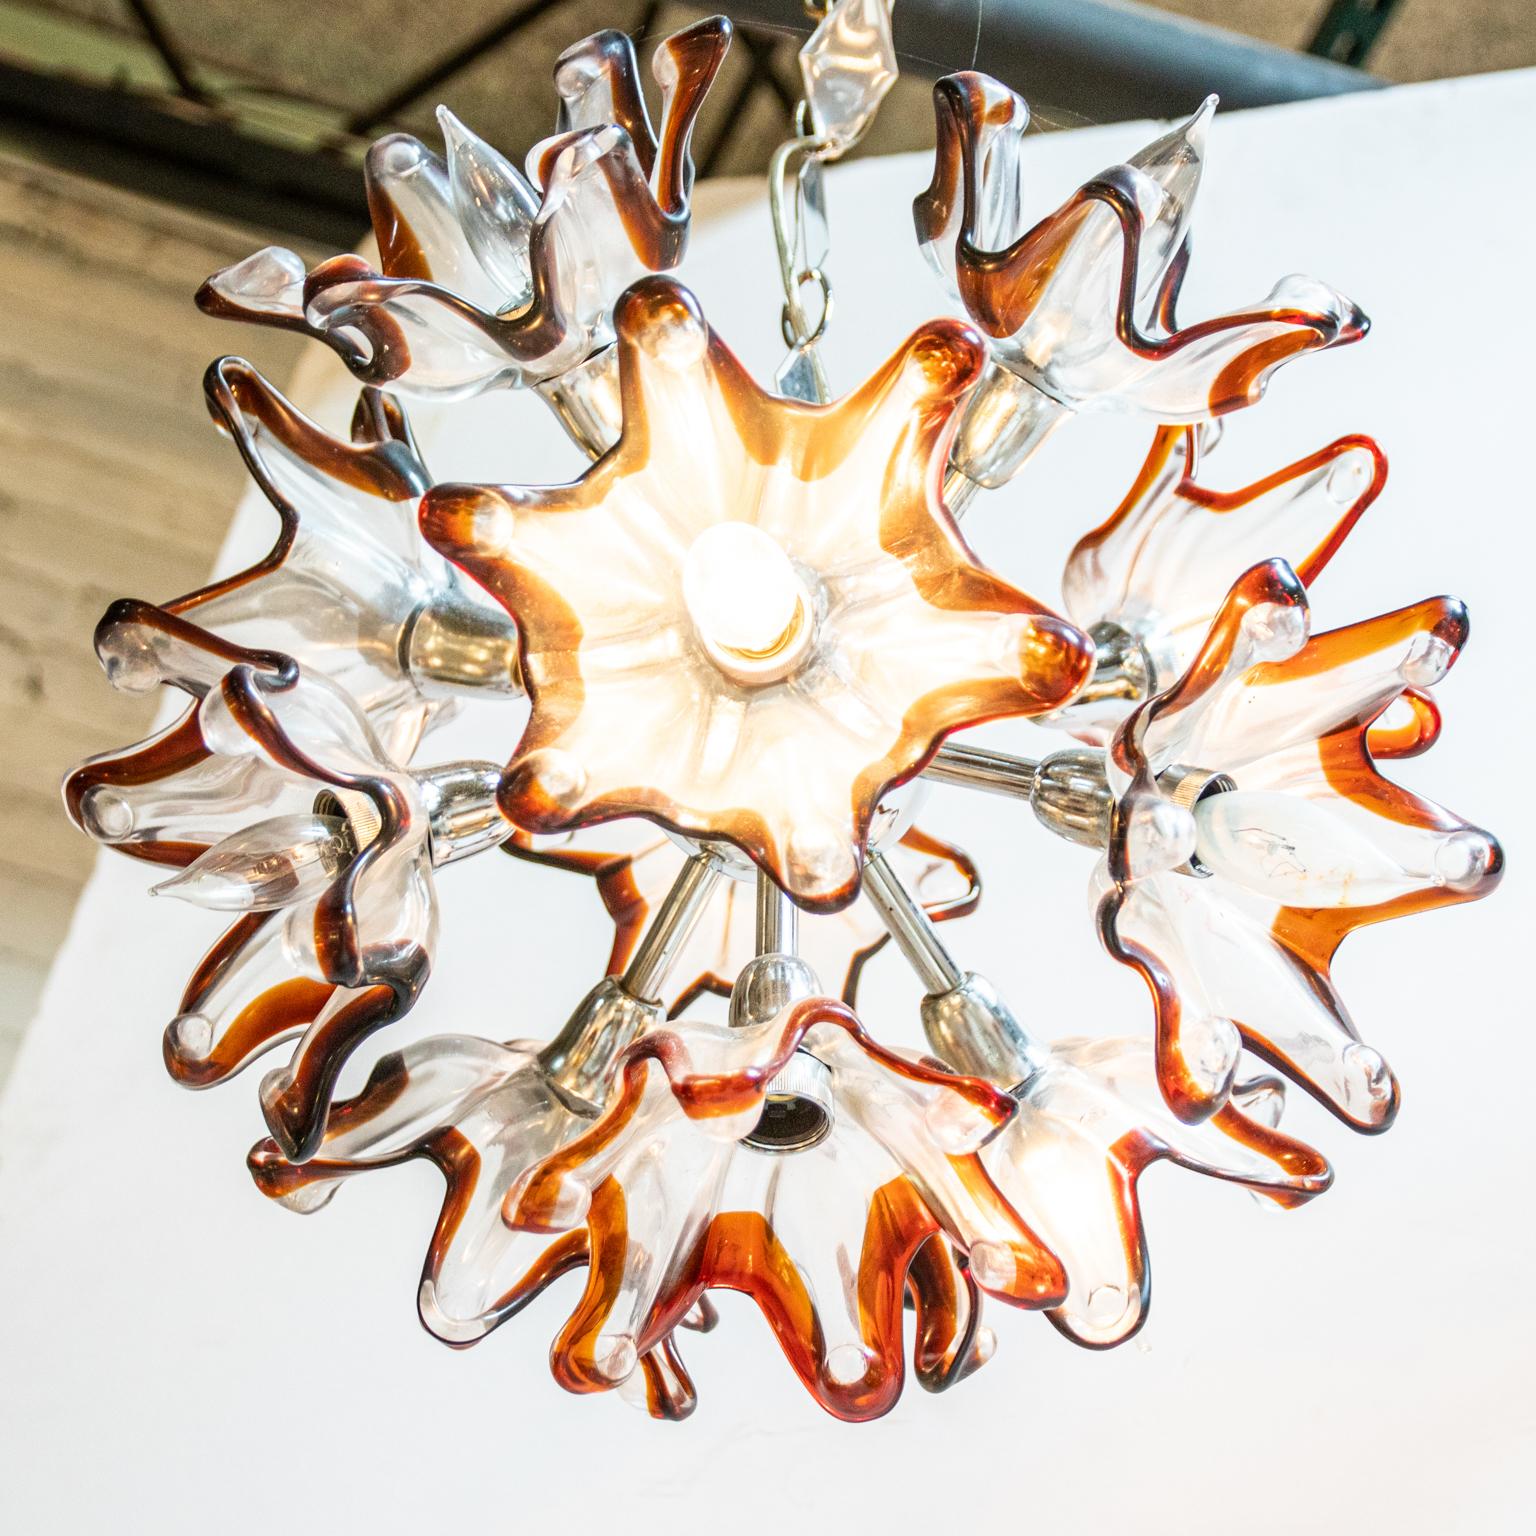 Circa 1960s Mid-Century Modern style murano glass and metal chandelier with glass tulip flowers detailed with amber colored glass edges. The chandelier is in a similar form to a Sputnik light fixture of the same Mid-Century Modern style with a